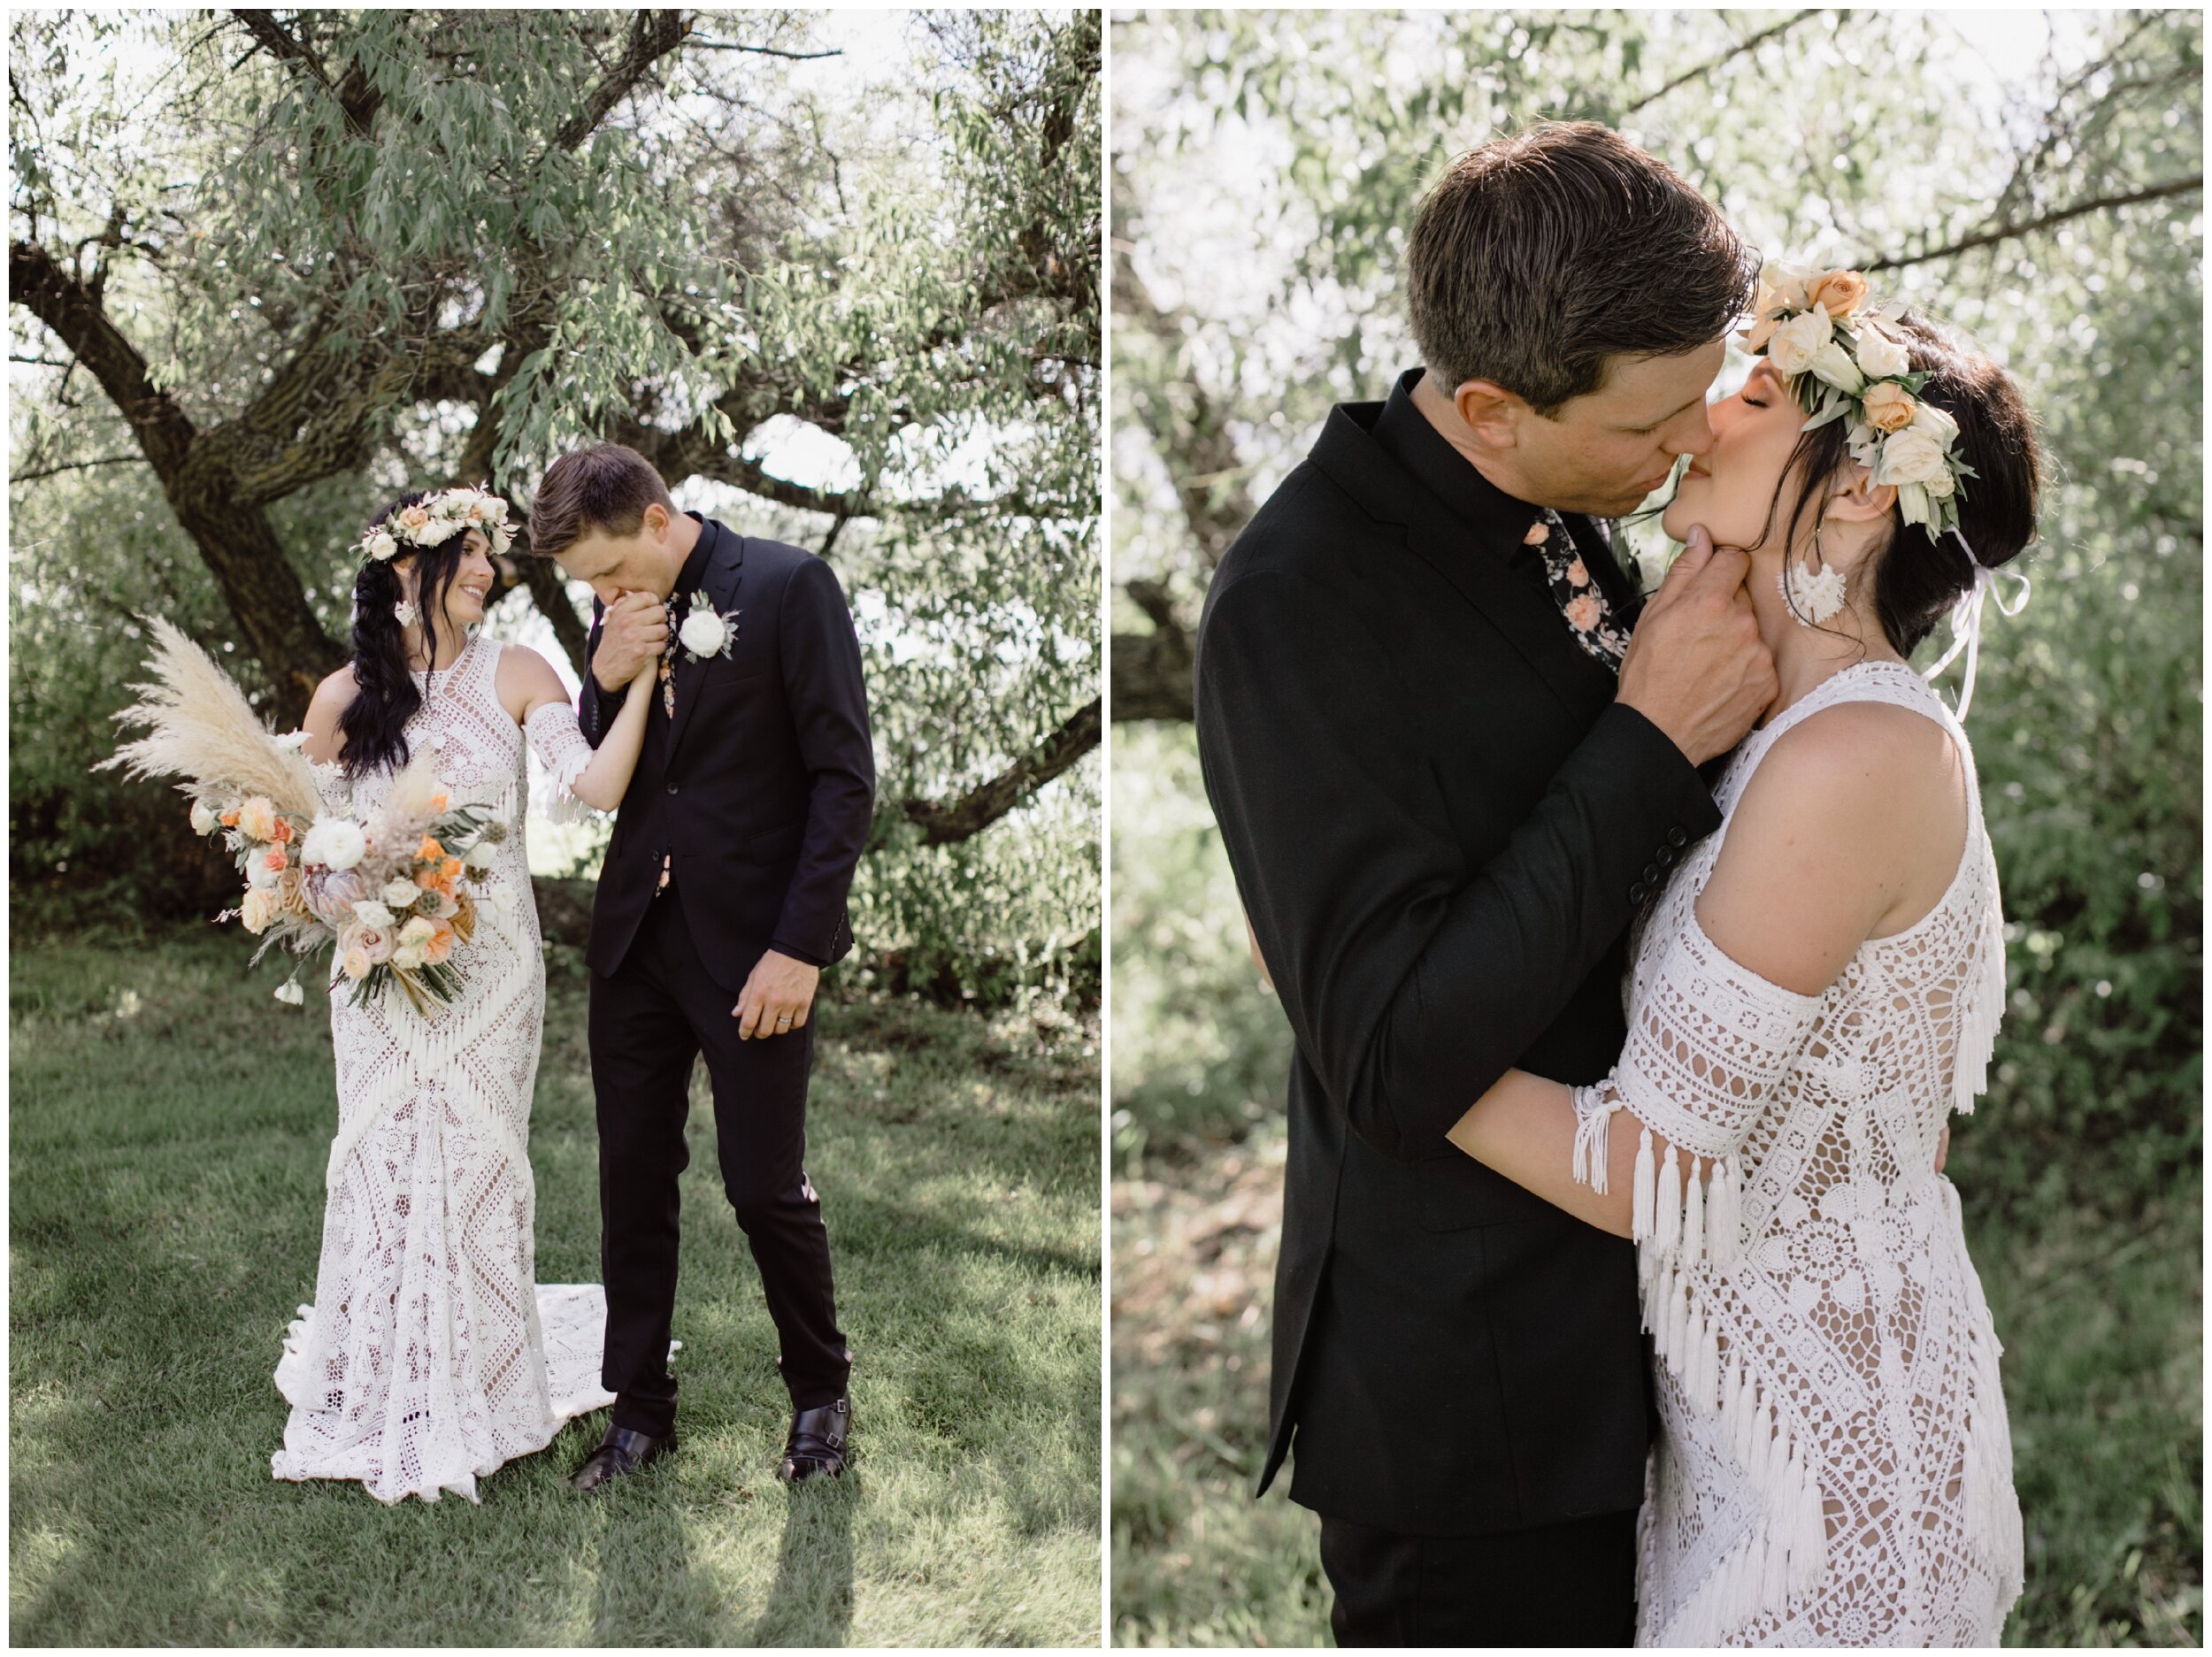 Bride and groom kissing in front on willow tree at boho themed backyard wedding in northern Minnesota